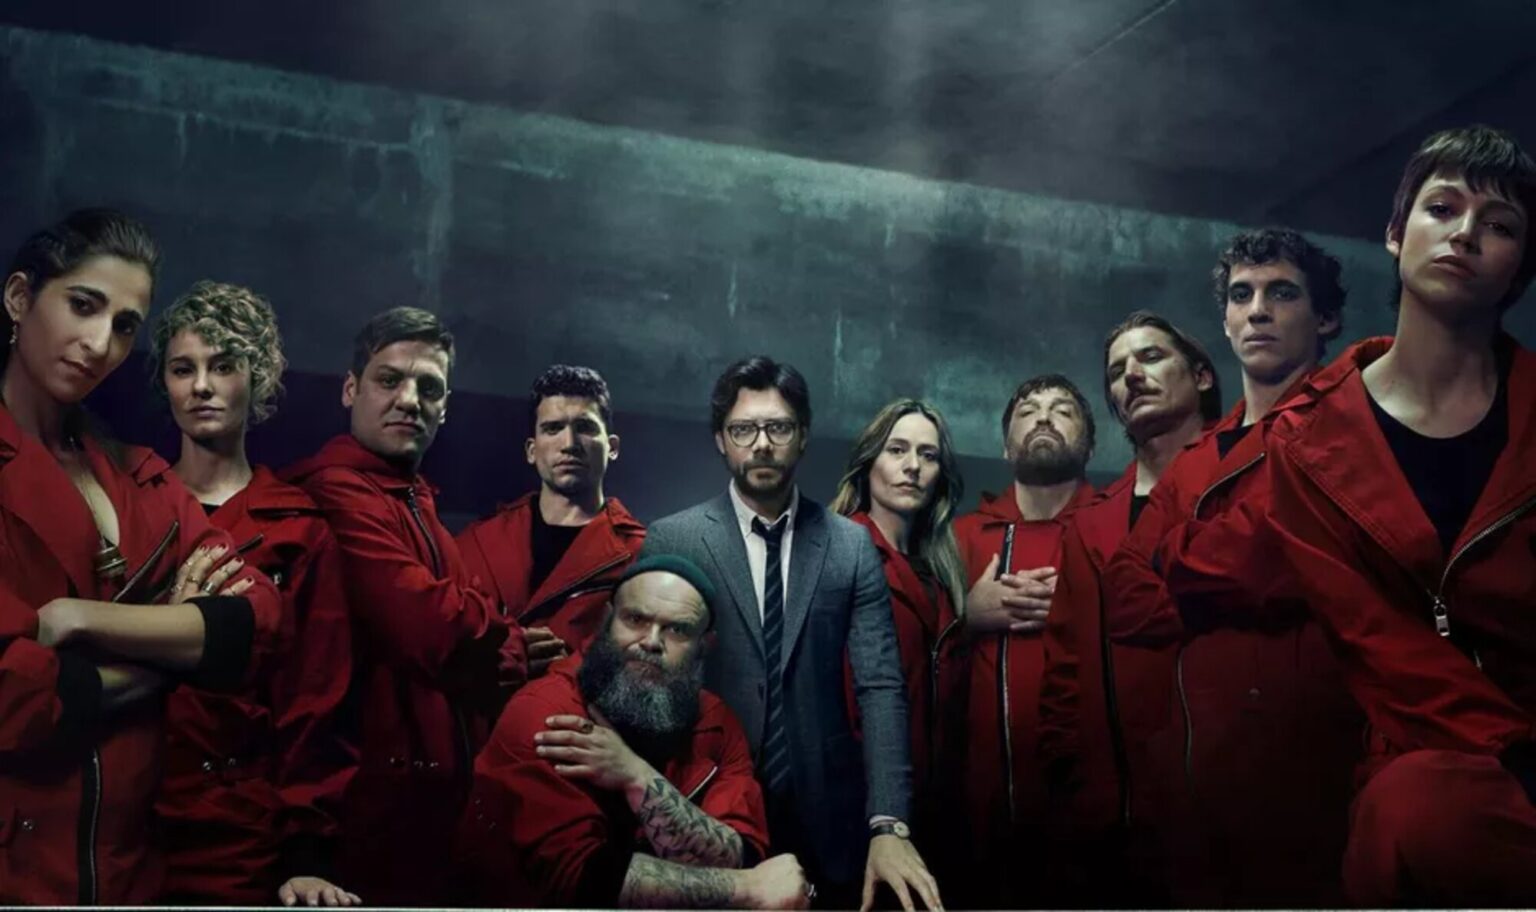 What can we expect with the upcoming season of 'Money Heist' when it comes to the character of Tokio? Read about all the fan theories of the show here.